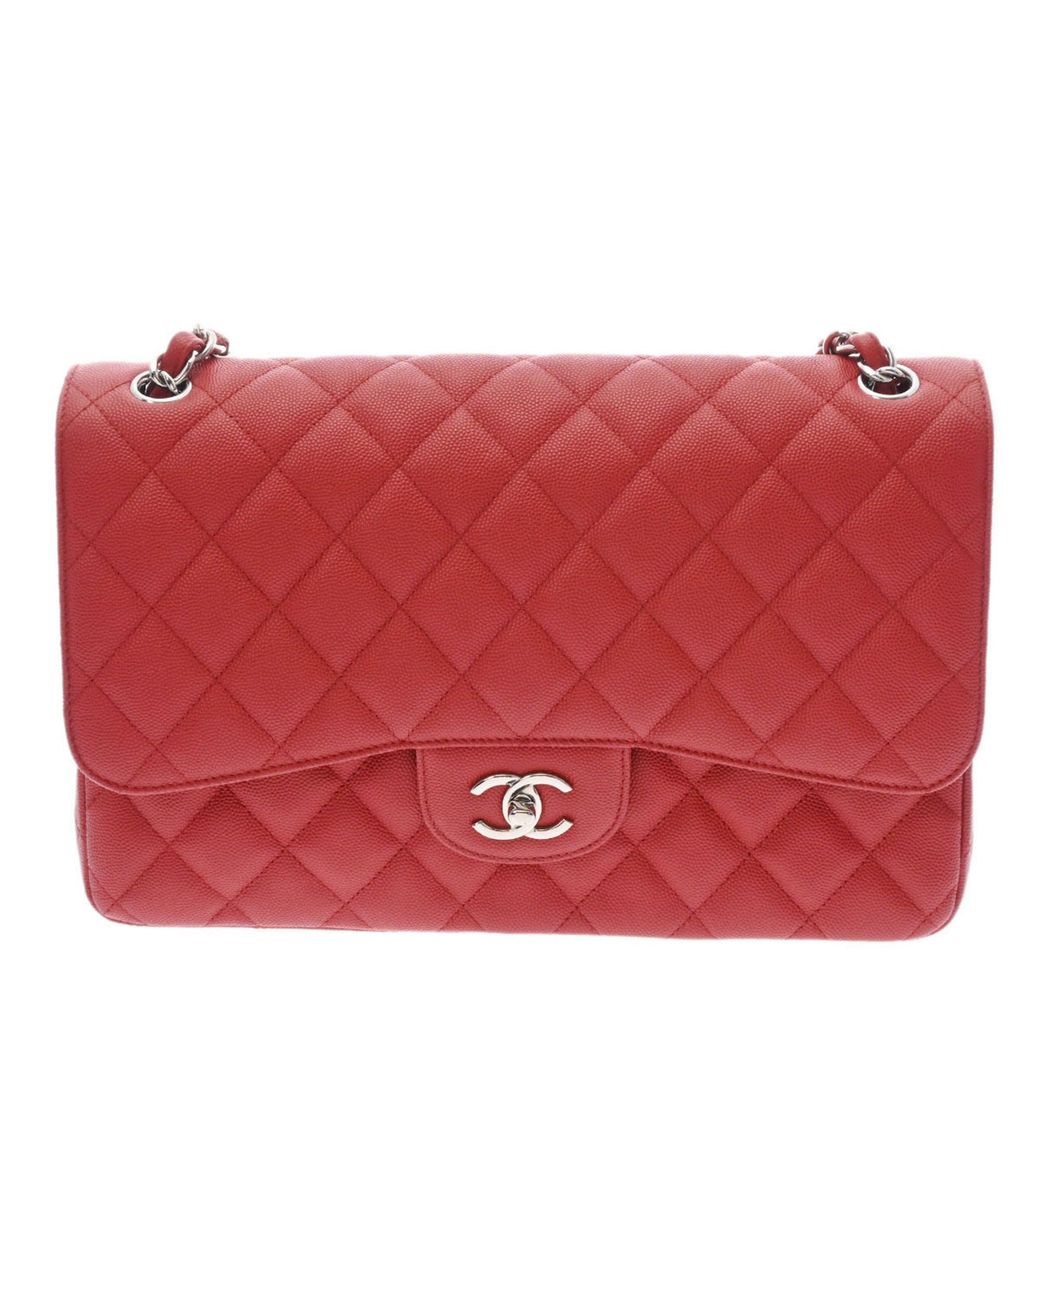 Chanel - Red Caviar Timeless Vanity